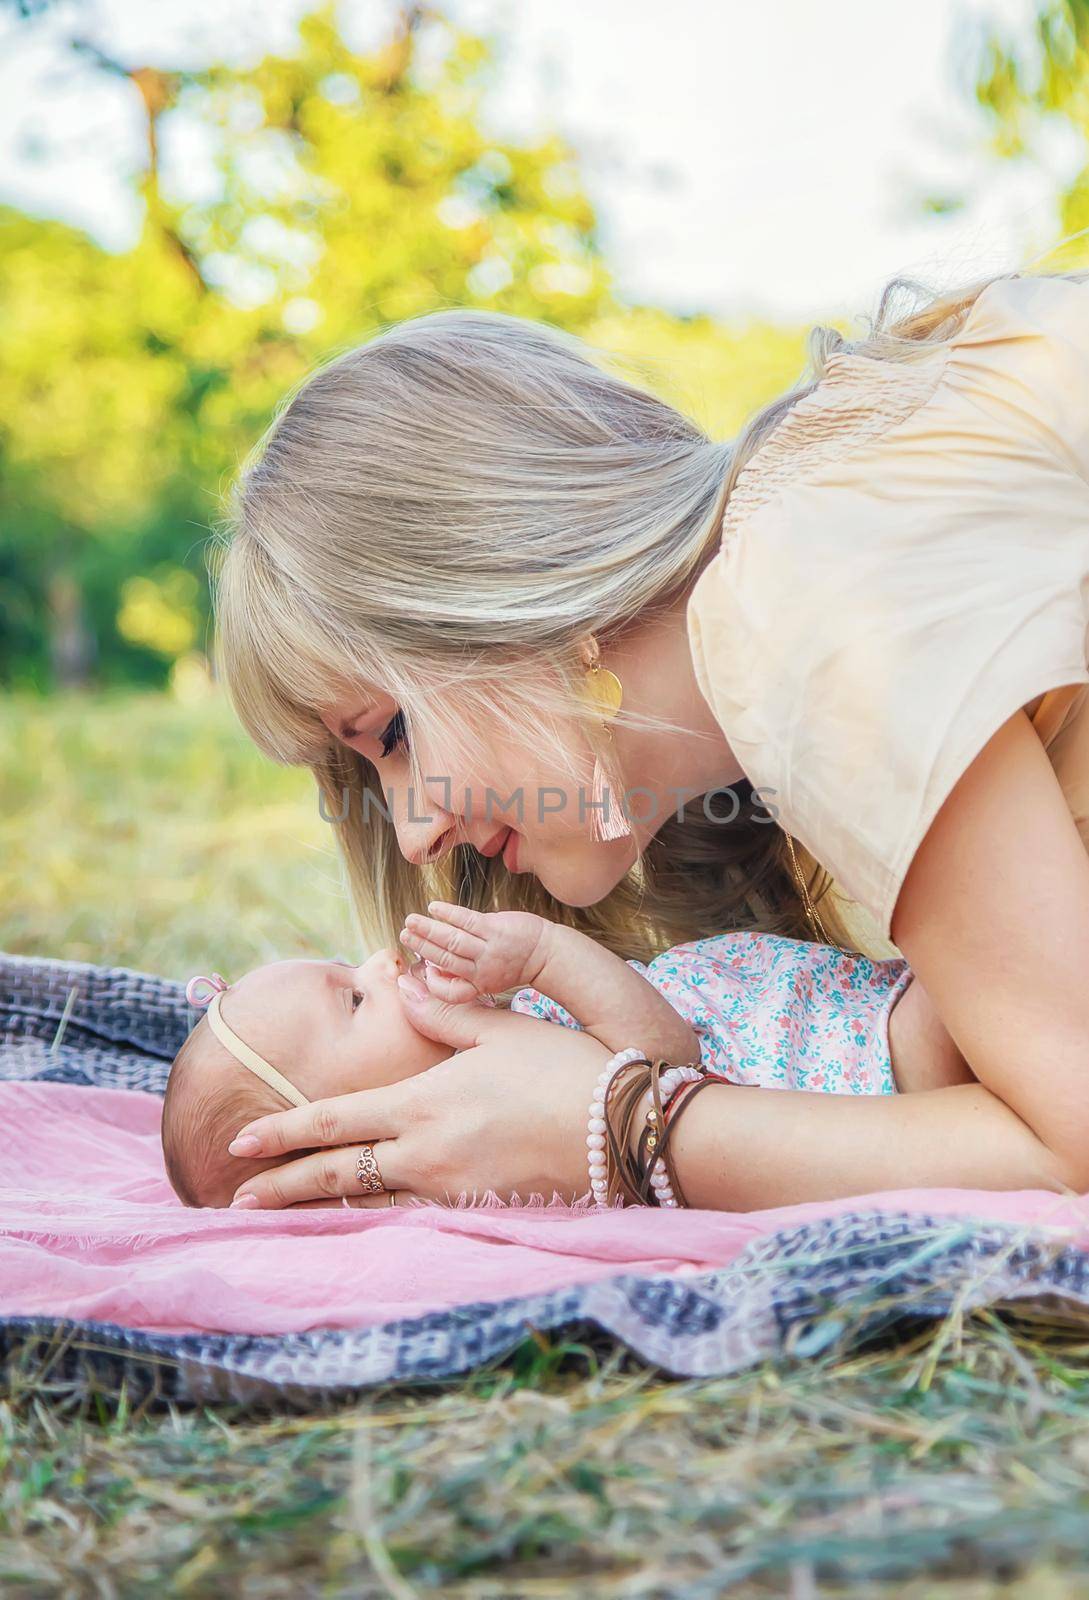 Mom with a newborn baby in her arms. Selective focus. by yanadjana